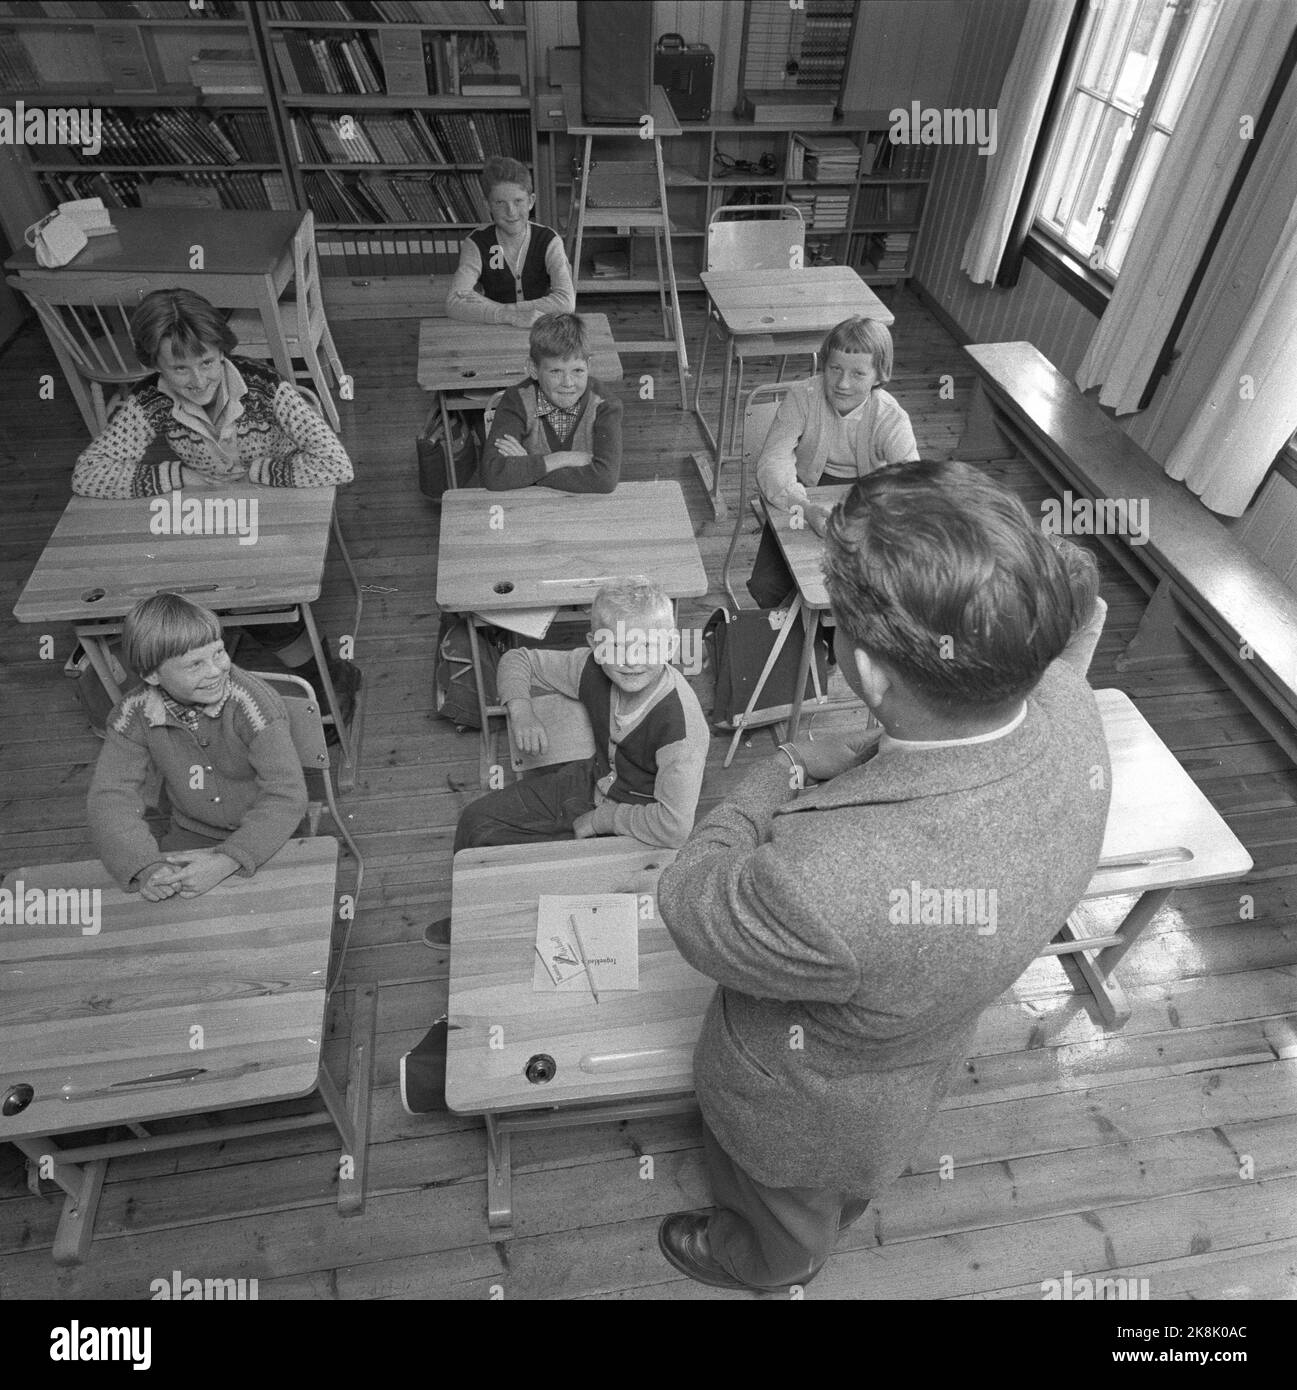 Oslo 1956. Bjørnholt school Seven -year -old Tore on Lake Skjærsjøen sits in the middle of the classroom in front of Bjørnholt school. It has only one classroom and students from 7 - 13 years .. The teacher stands in front of the desks. Photo: Sverre A. Børretzen and Aage Storløkken / Current / NTB Stock Photo